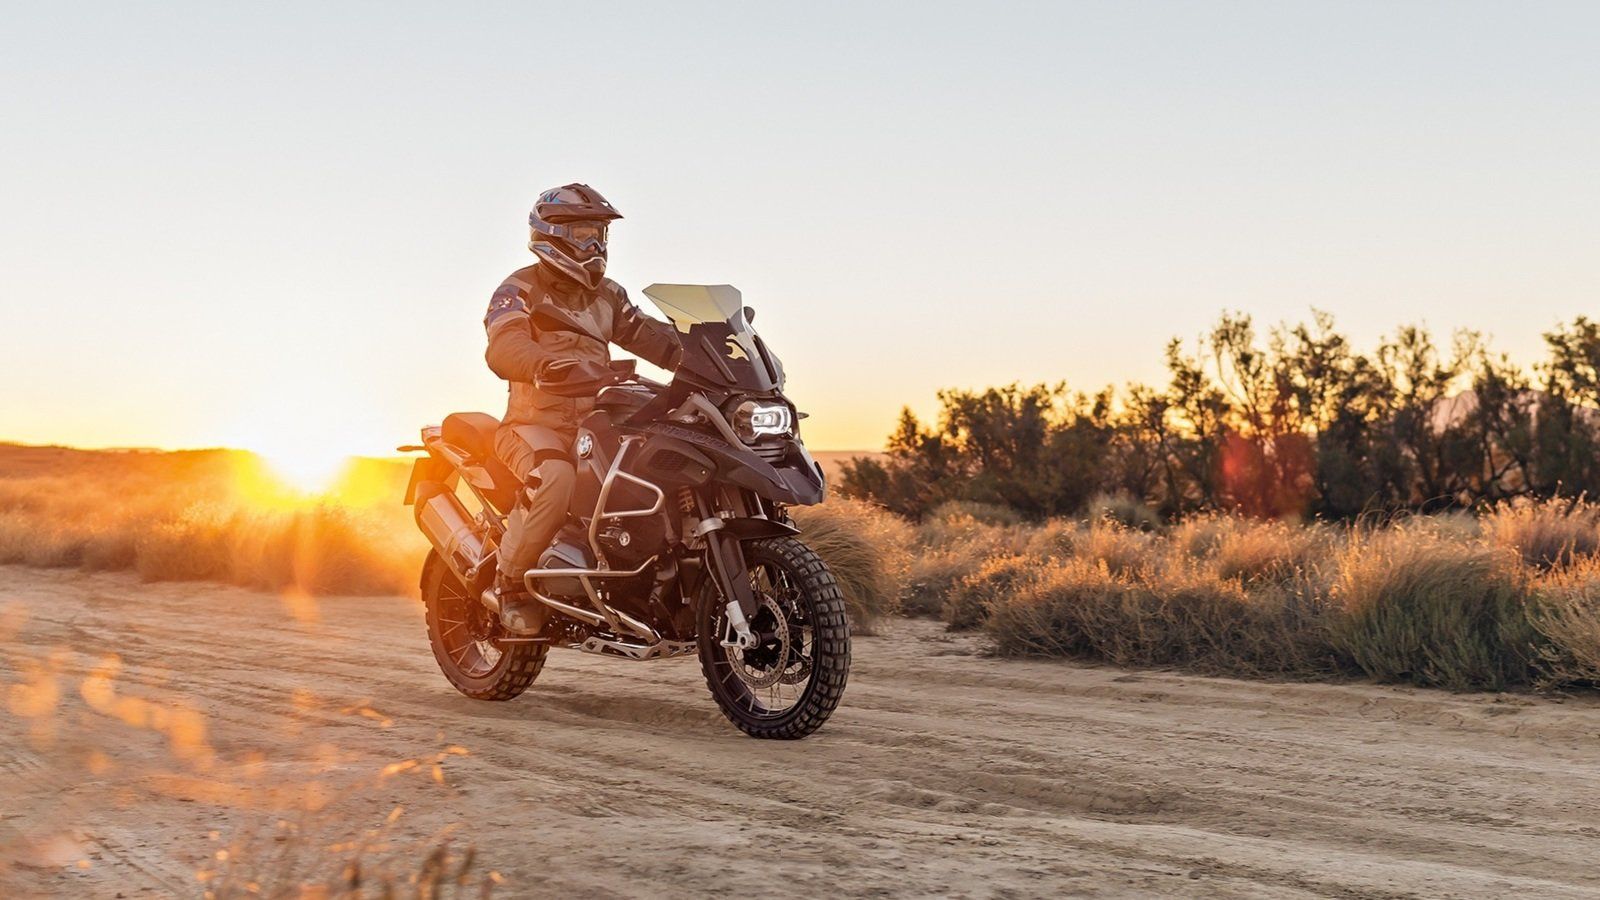 BMW R 1200 GS Adventure Picture, Photo, Wallpaper And Video